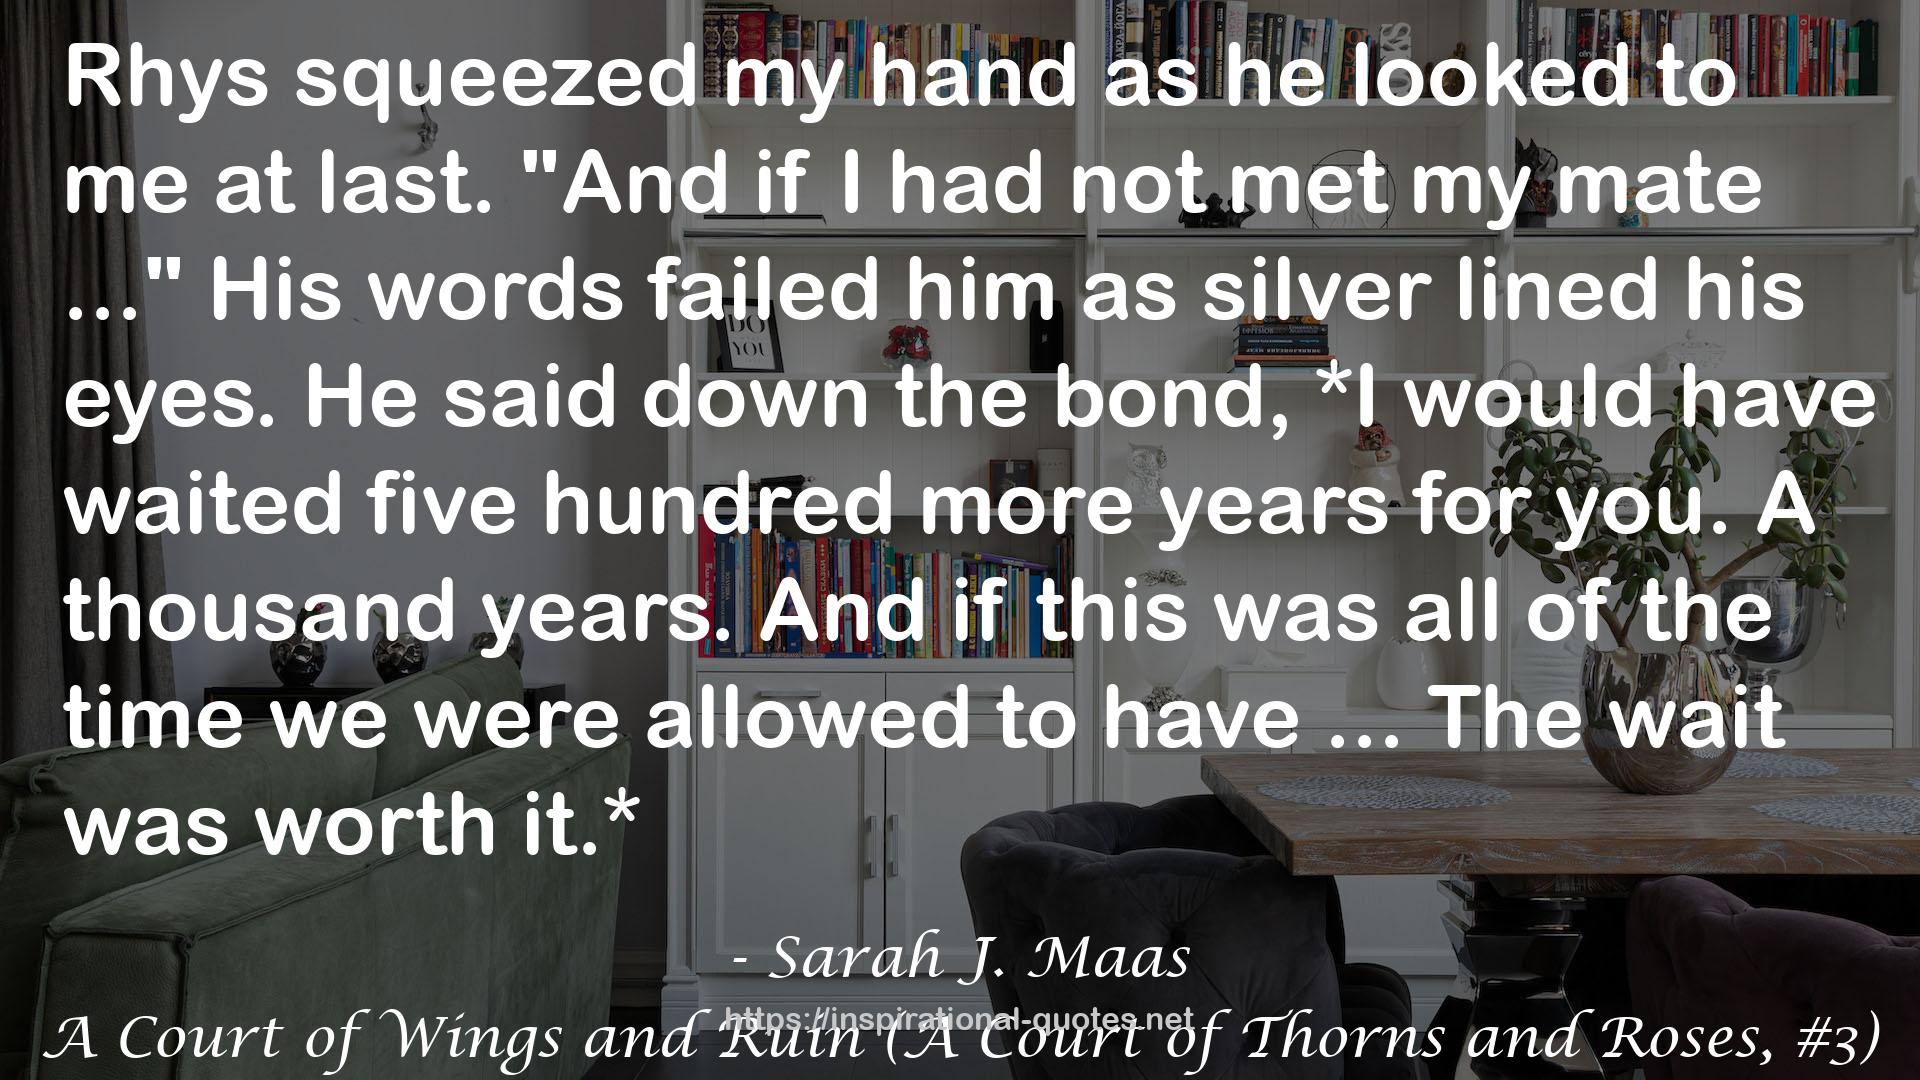 A Court of Wings and Ruin (A Court of Thorns and Roses, #3) QUOTES